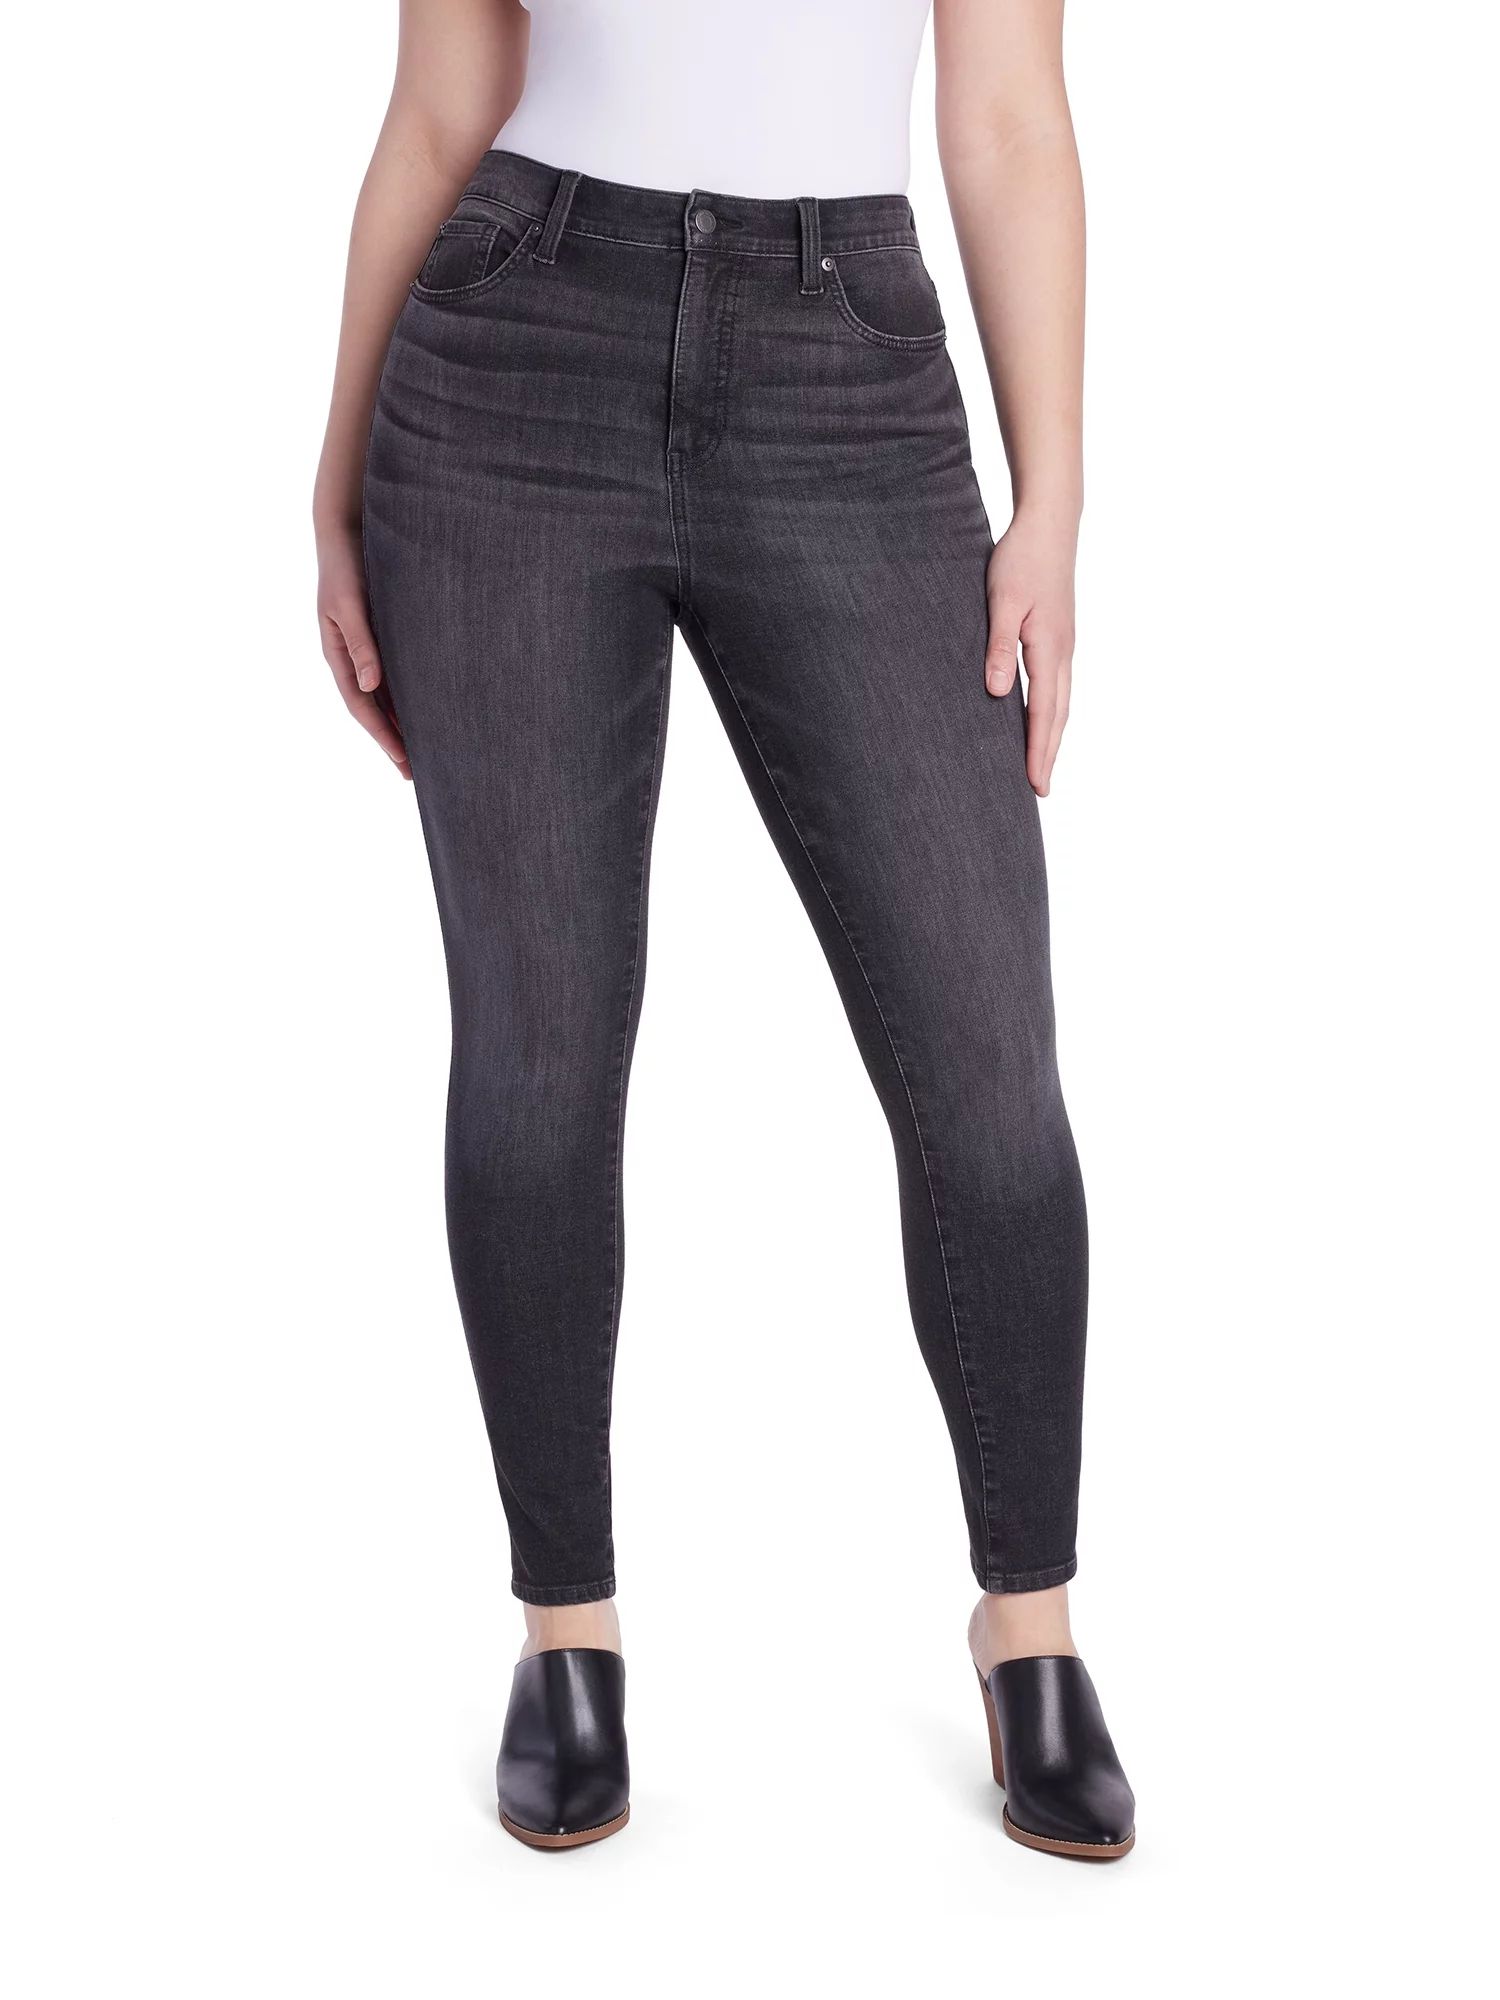 Time and Tru Women's High Rise Curvy Jeans, 29" Inseam for Regular, Sizes 4-22 | Walmart (US)